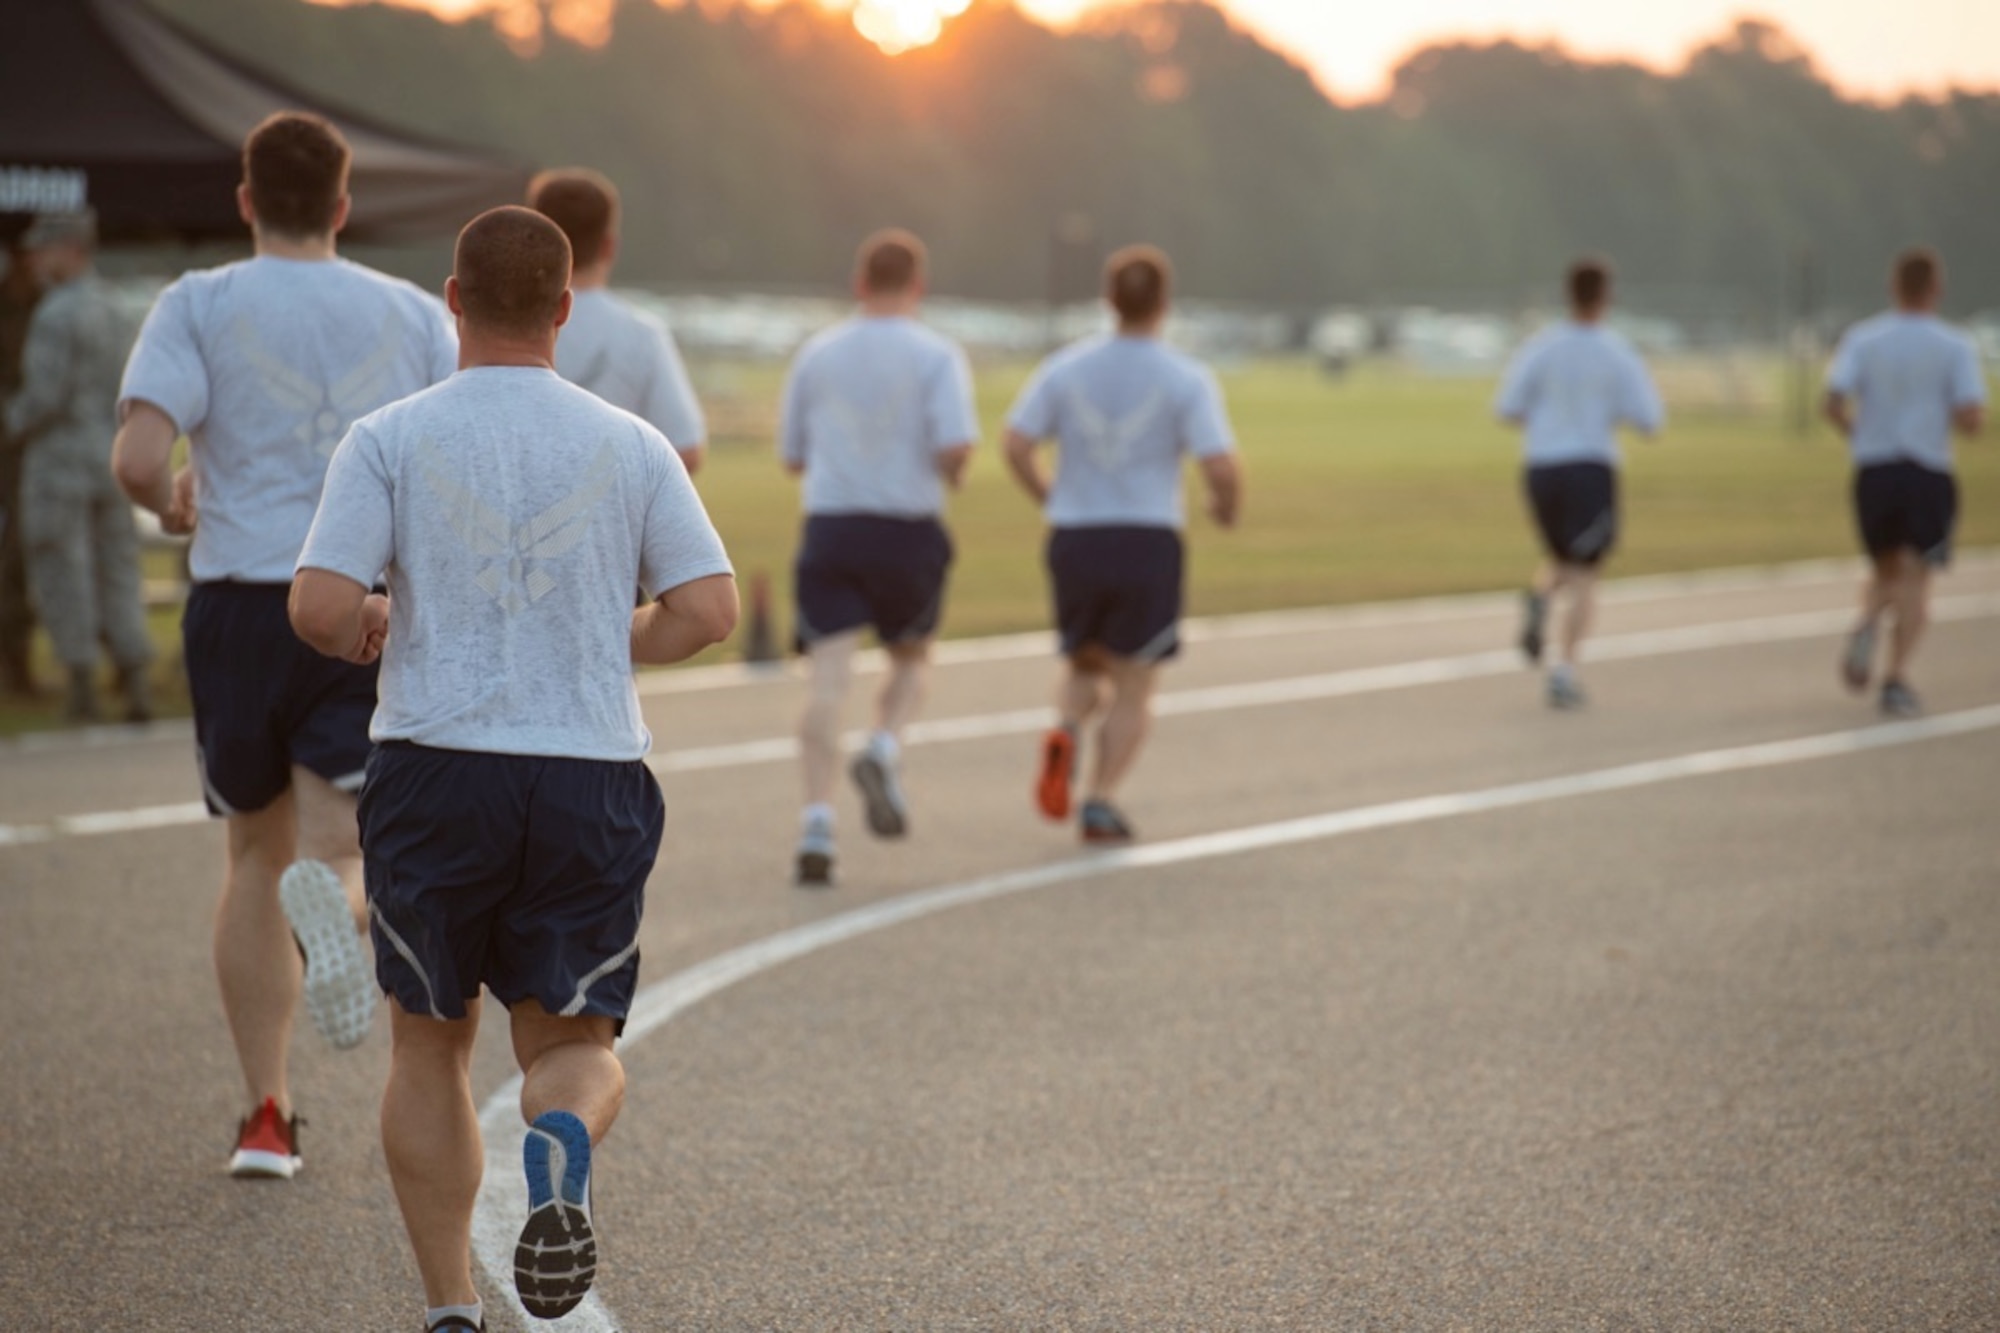 Servicemembers are now required to complete a mock physical fitness test within the first five days of any Air Force Enlisted Professional Military Education course lasting more than 20 days. (U.S. Air Force file photo)